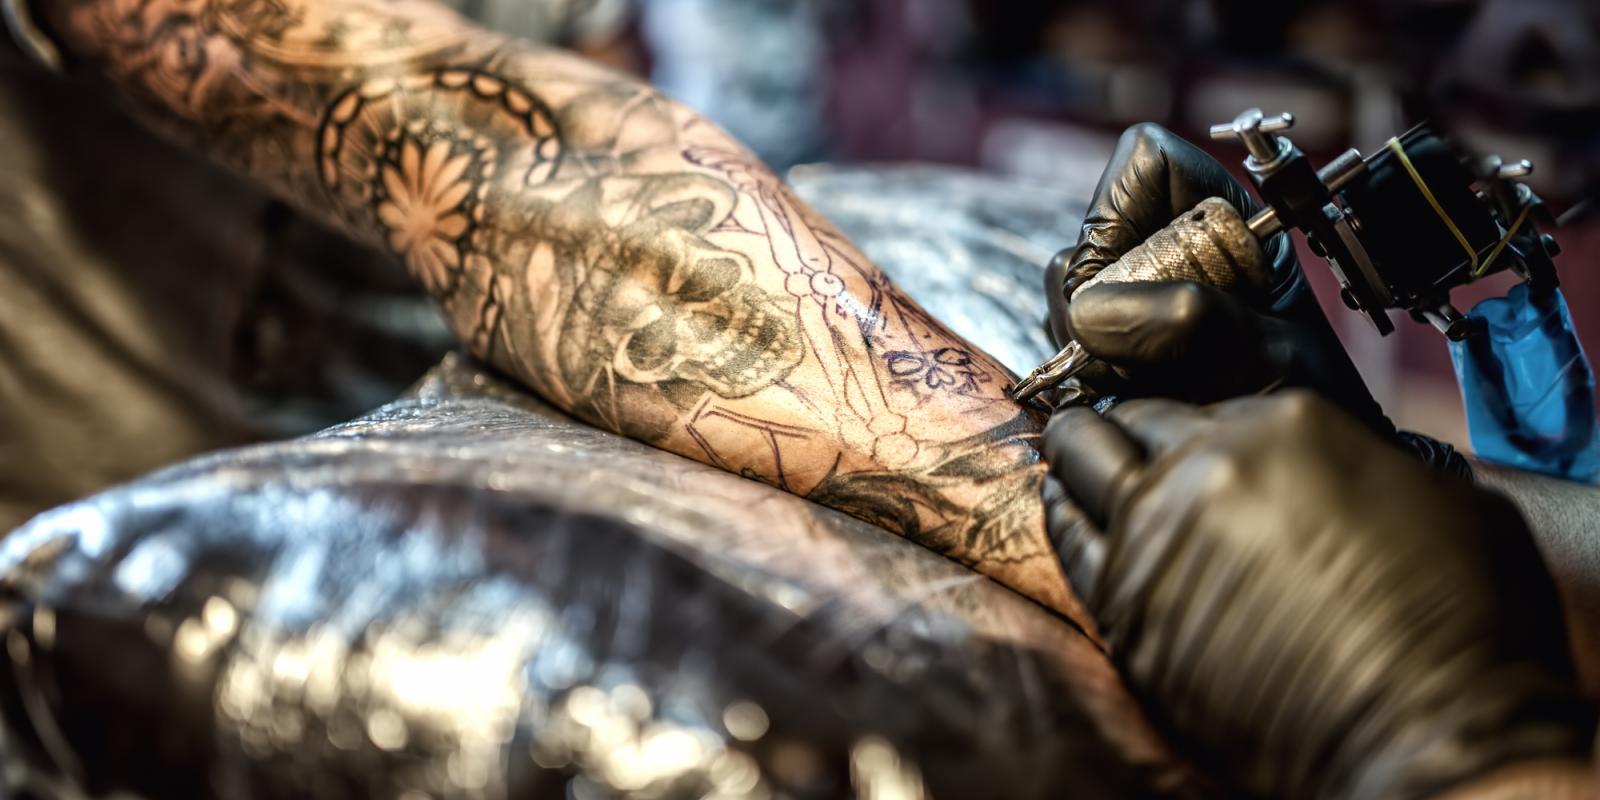 West Texas Tattoo Convention returning to San Angelo for 2020 event